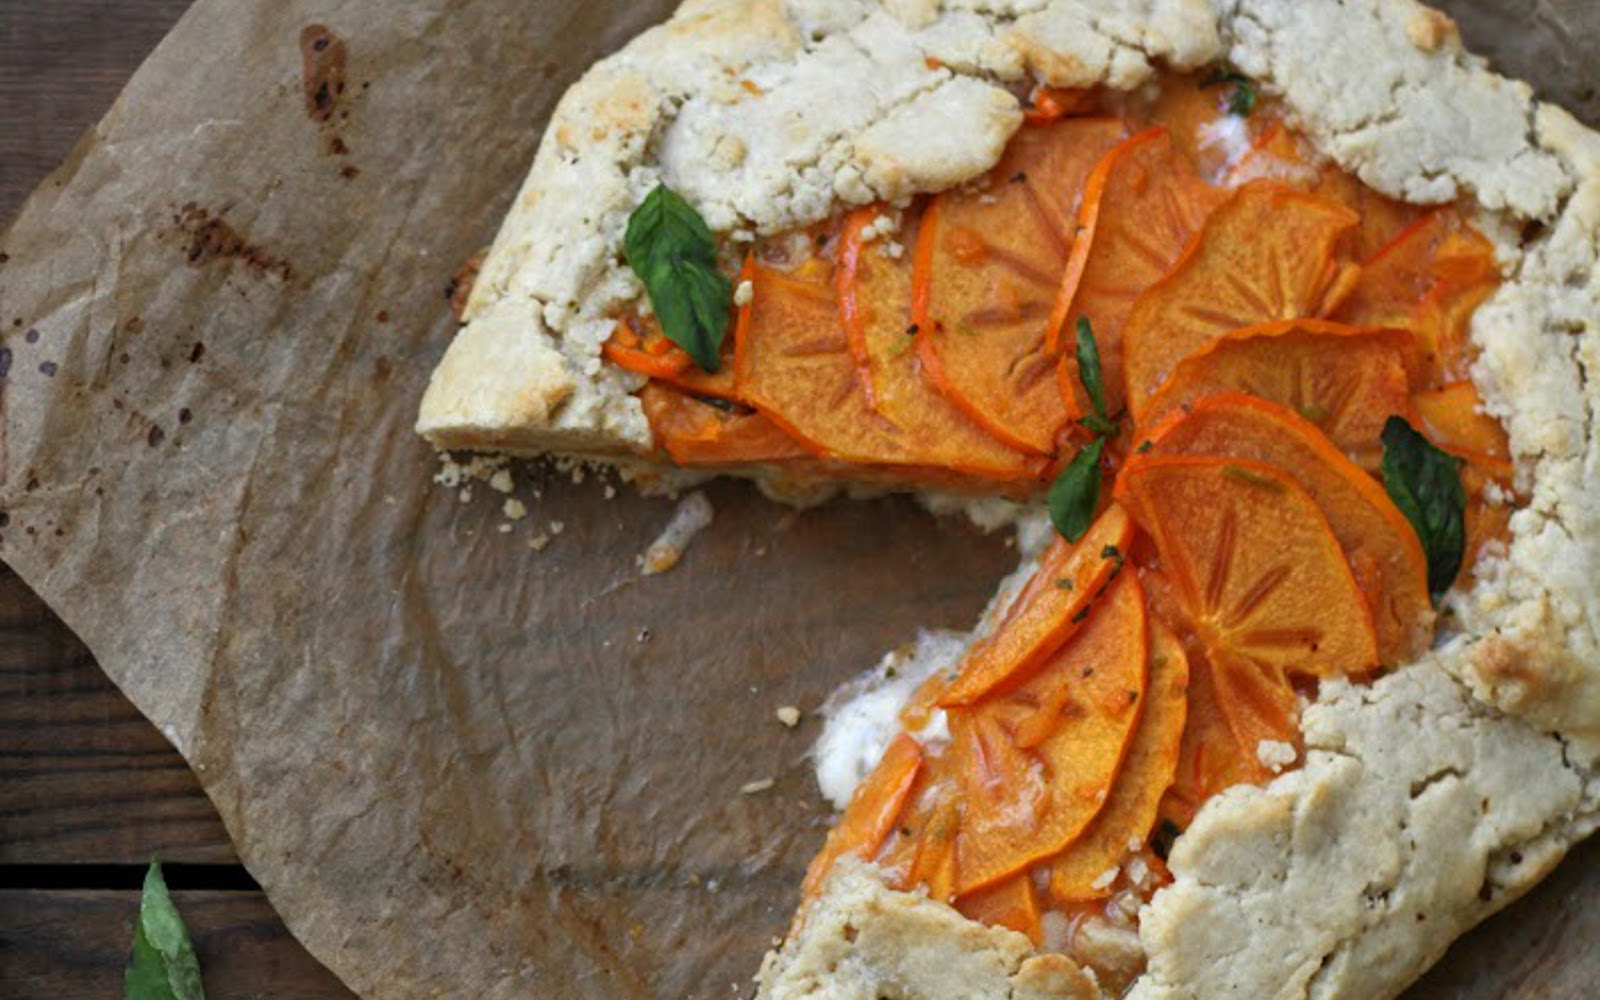 Persimmon and Basil Cream Galette